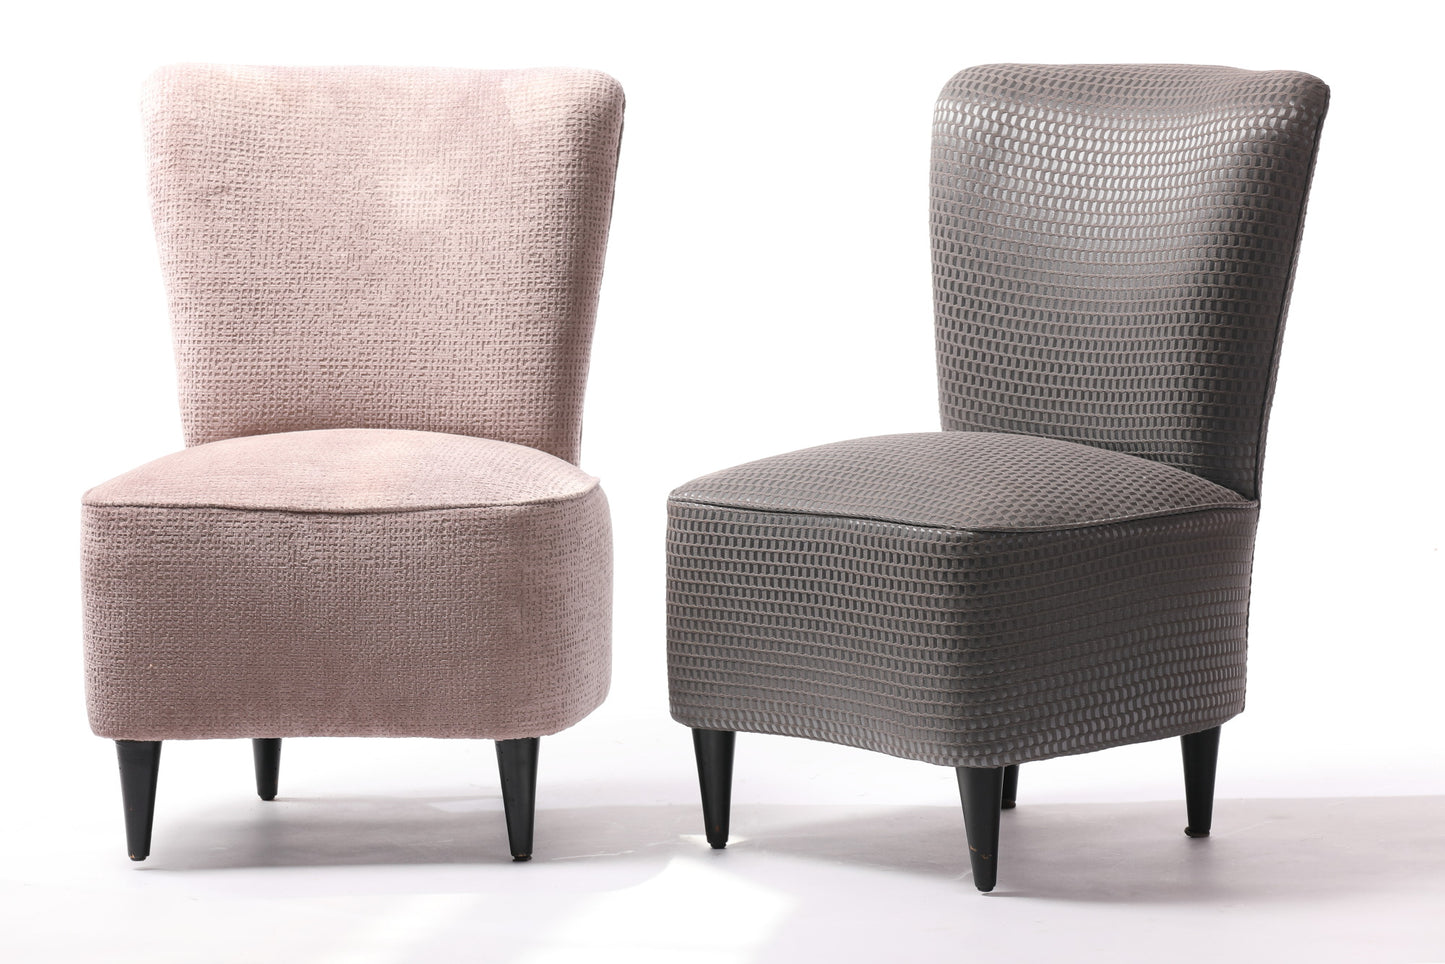 Pair of bedroom armchairs from the 50s in pink and gray satin and velvet